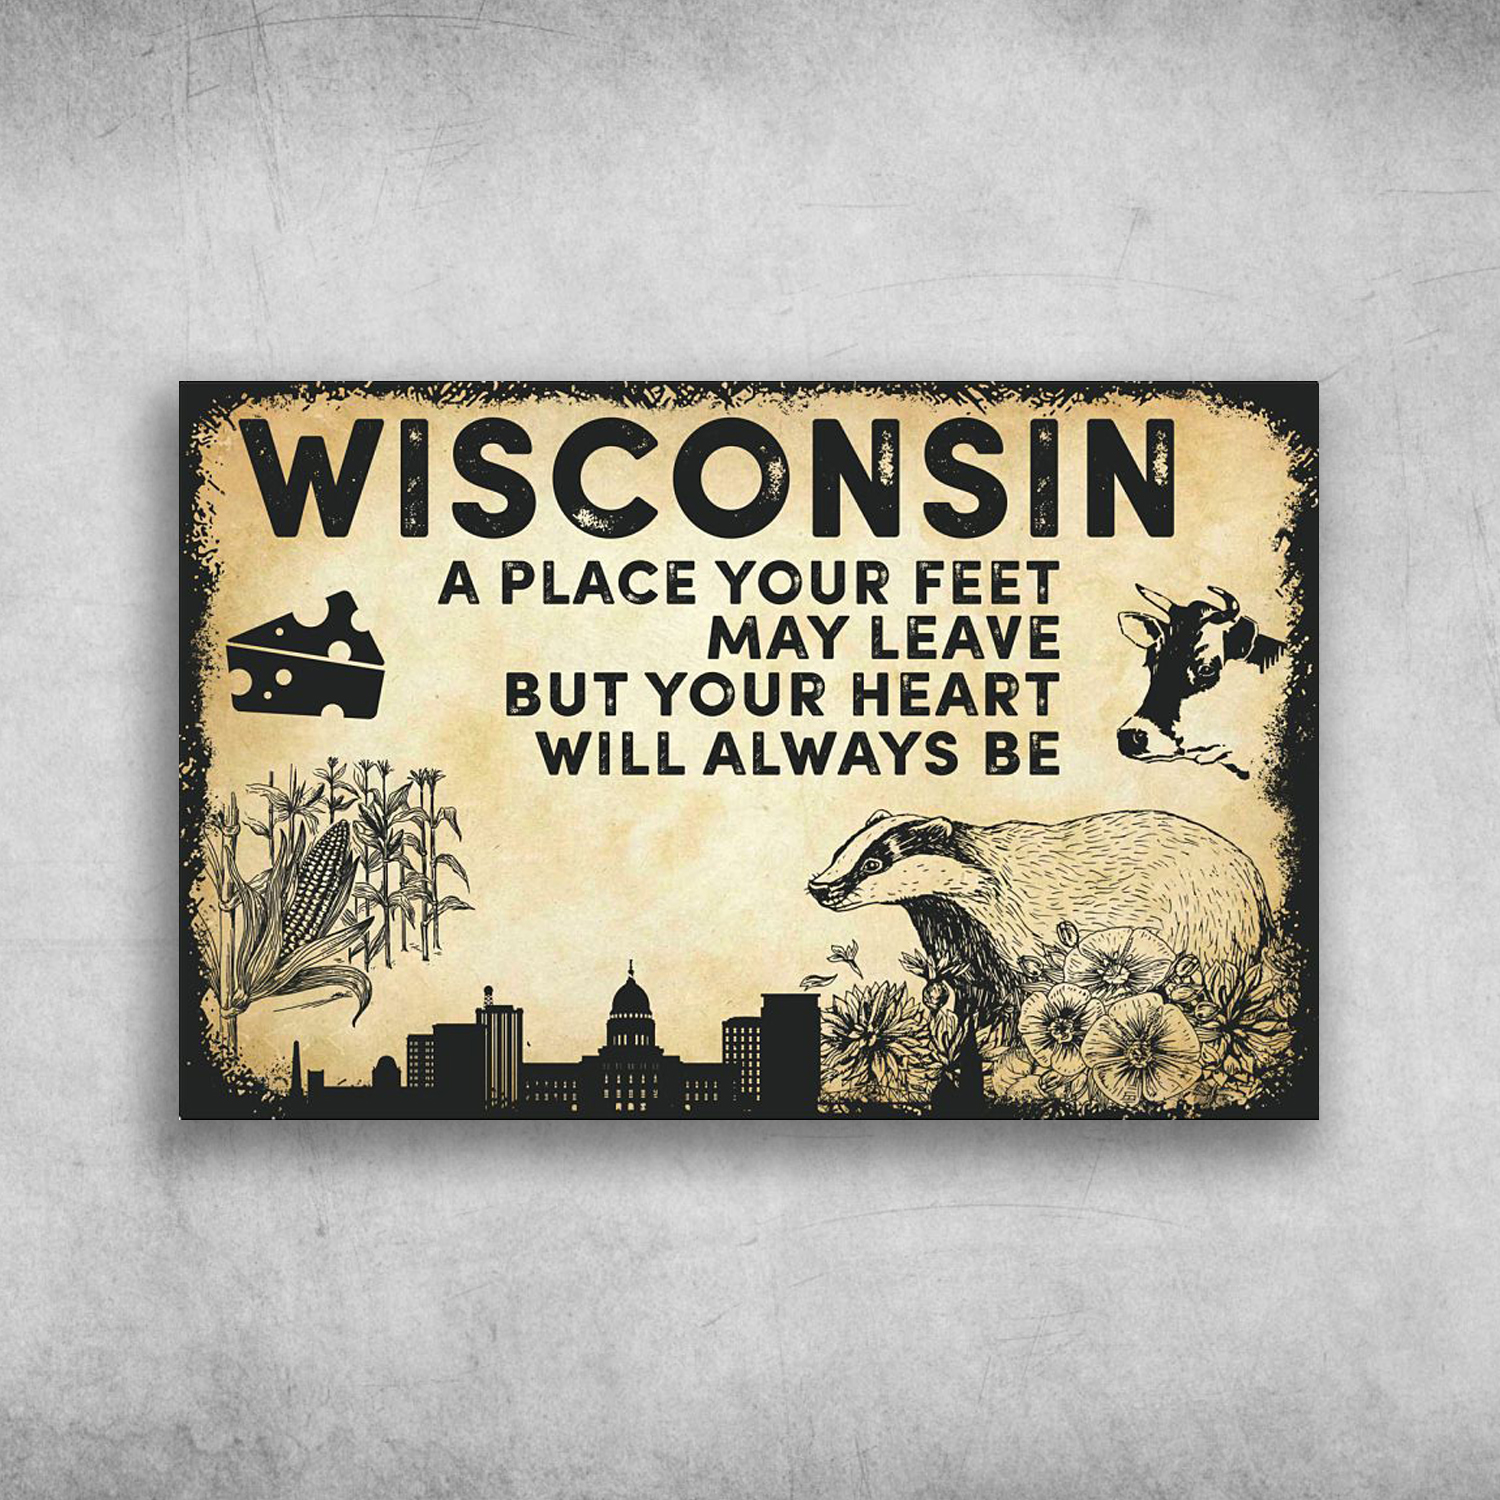 Wisconsin America A Place Your Feet May Leave